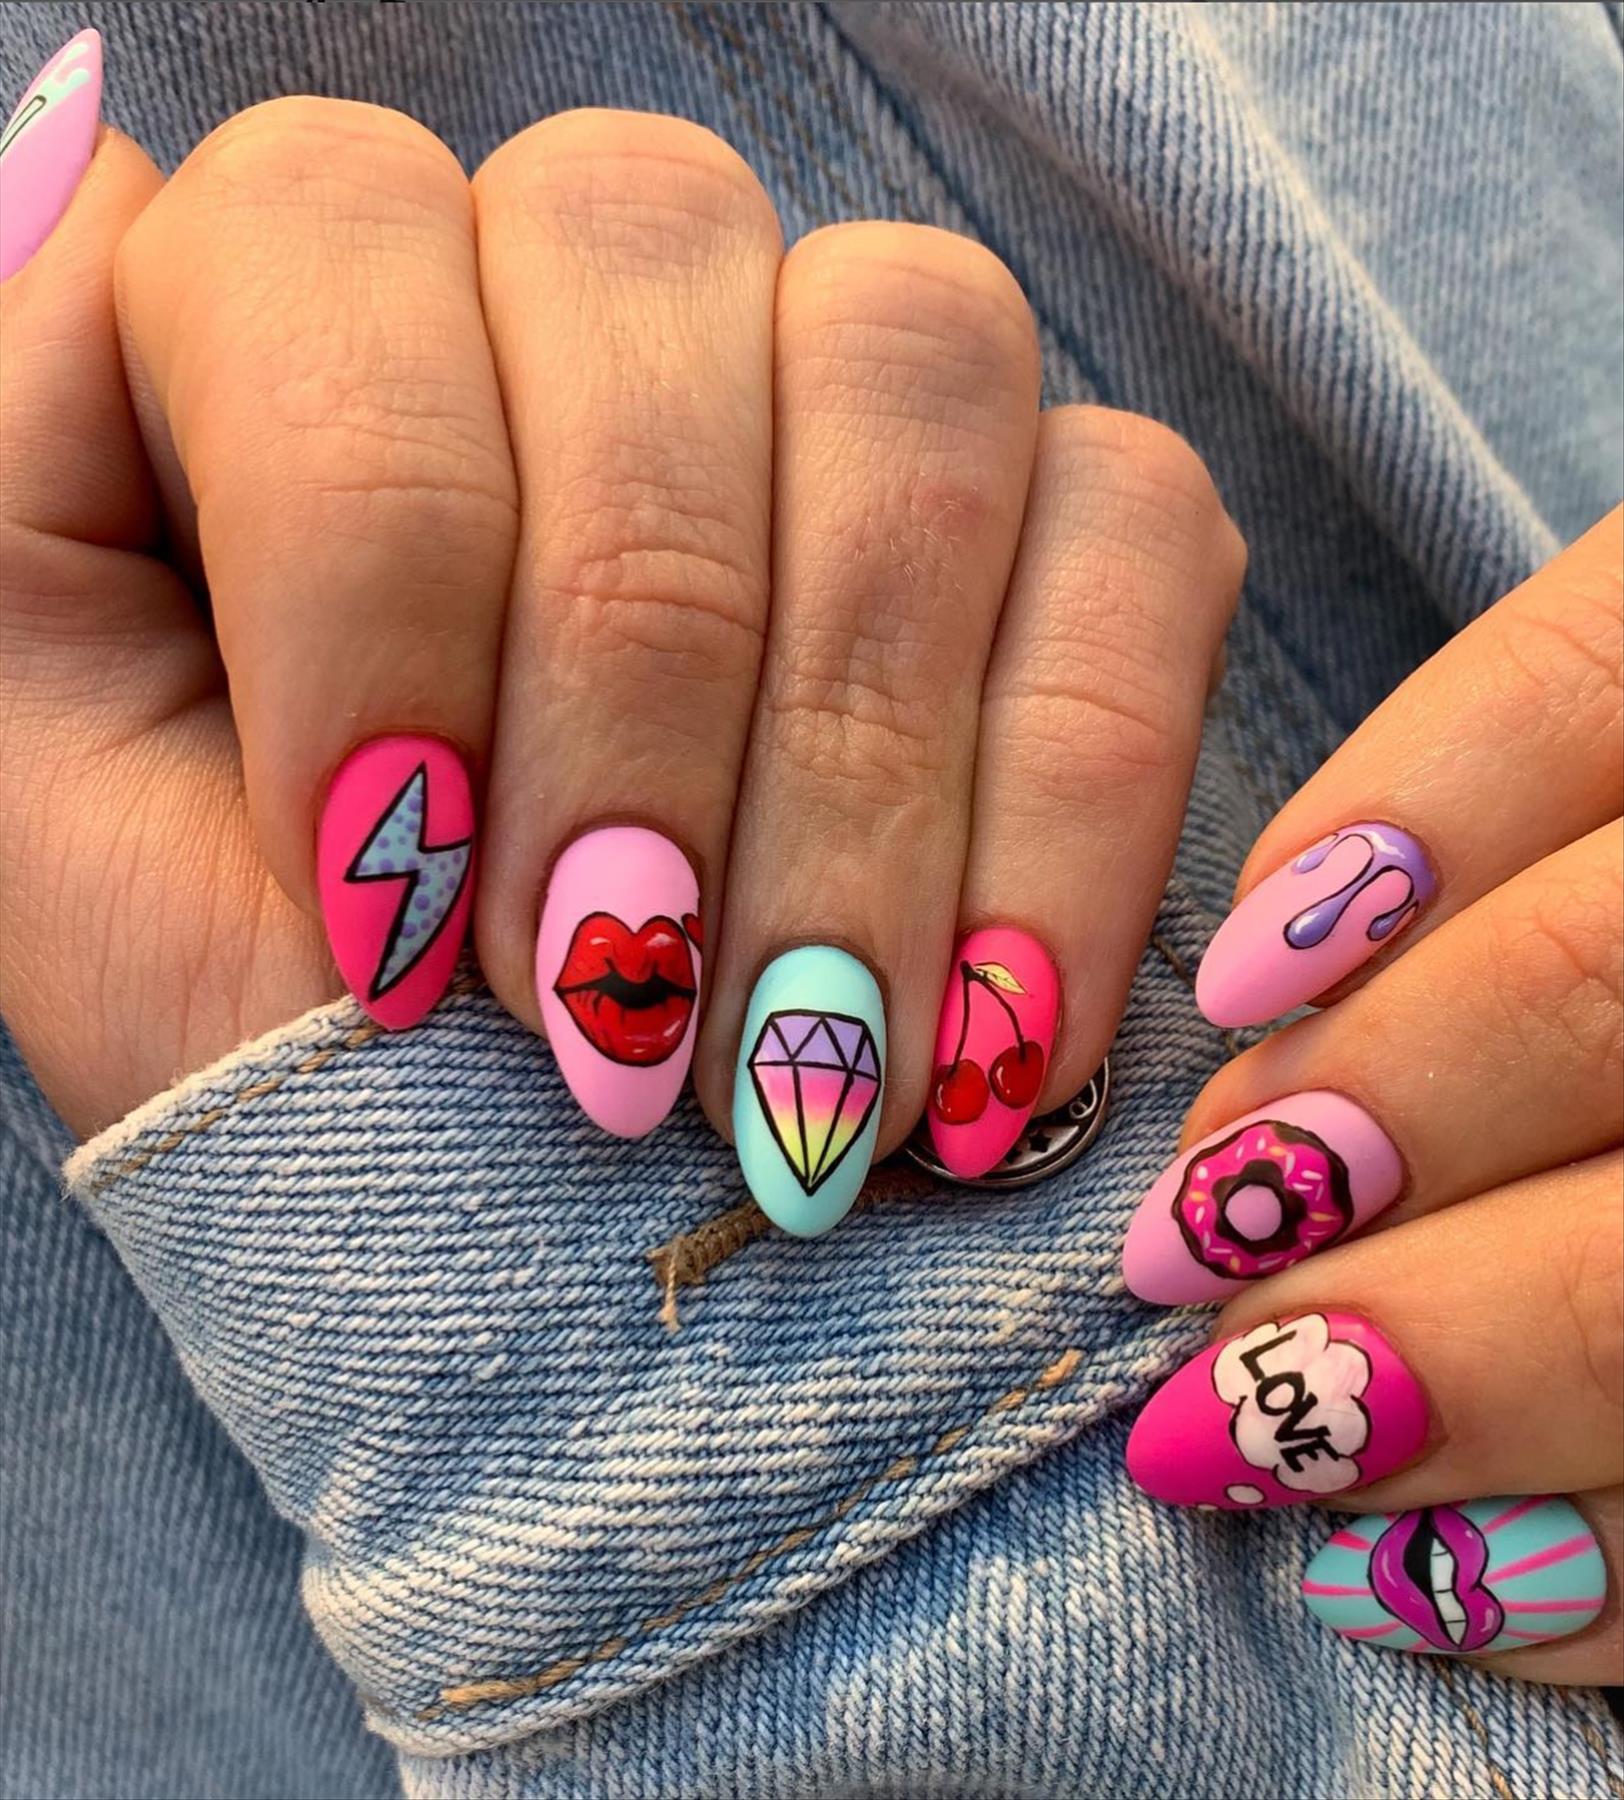 30 Perfect Very Short Nail Ideas 2022 To Wear Now